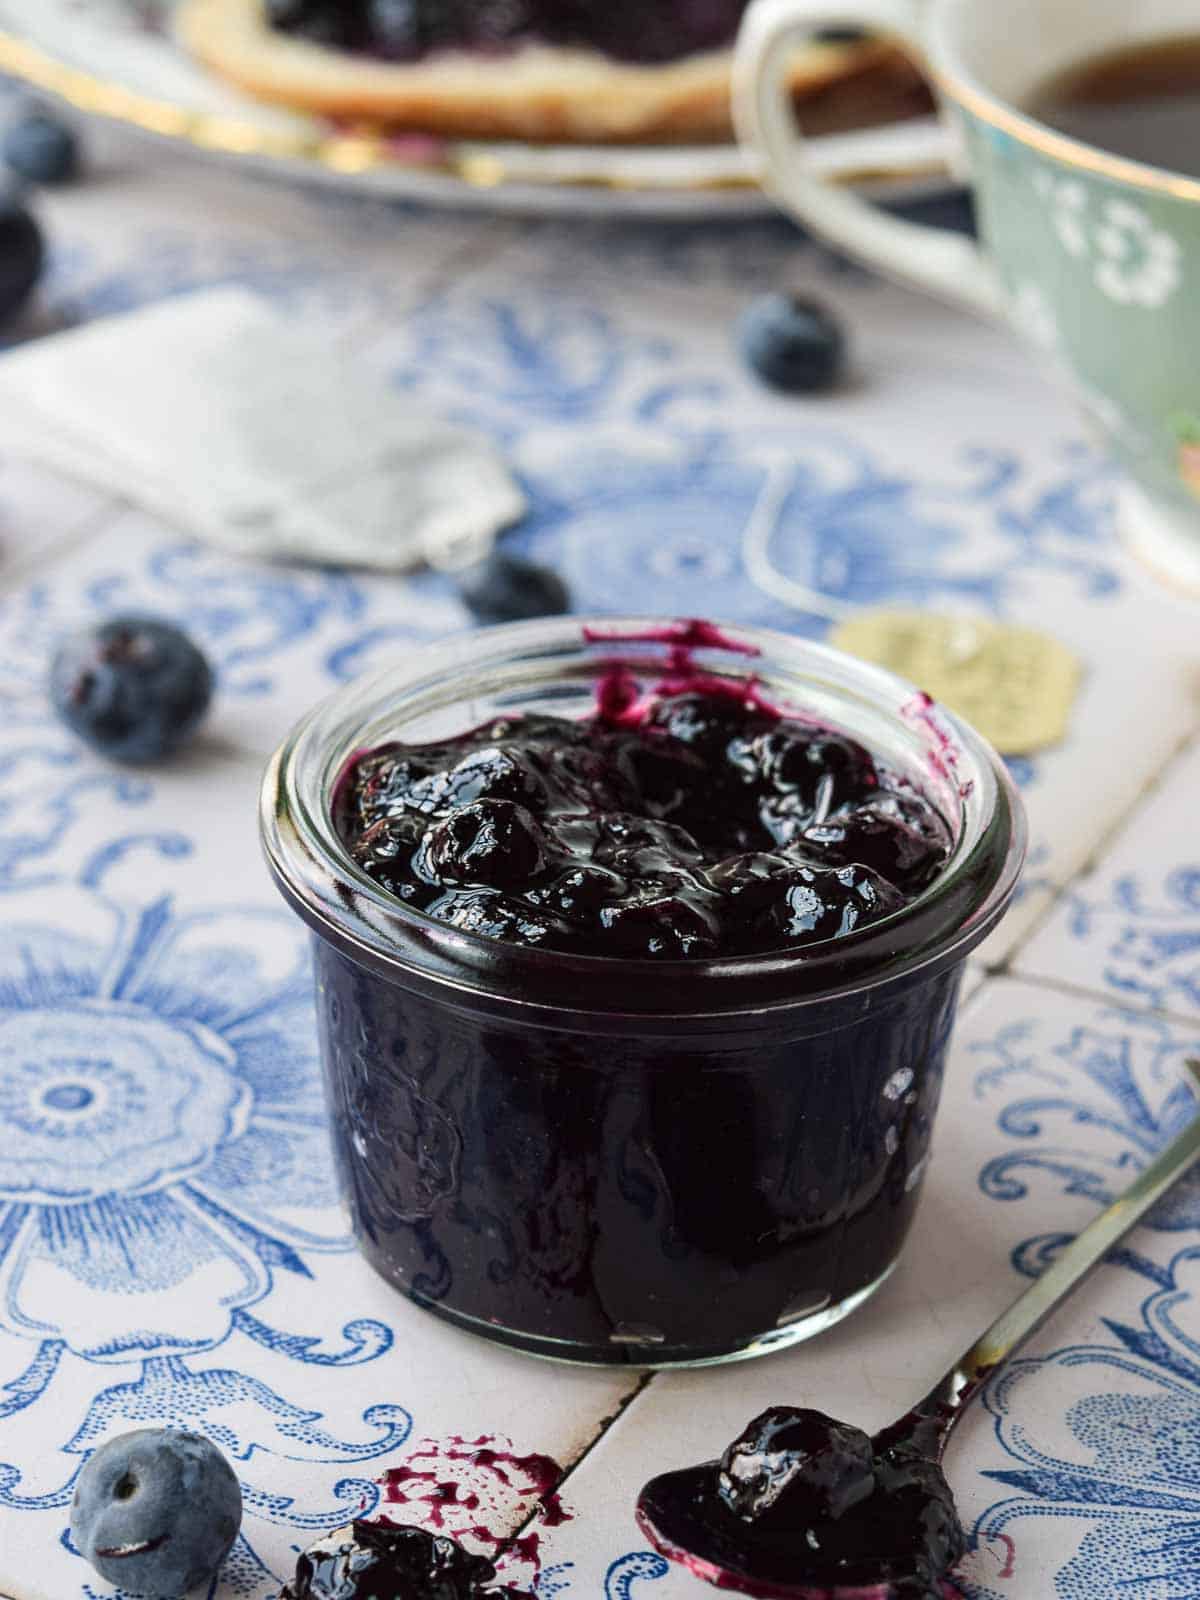 Close-up of blueberry earl grey jam on blue tile in a small glass jar.